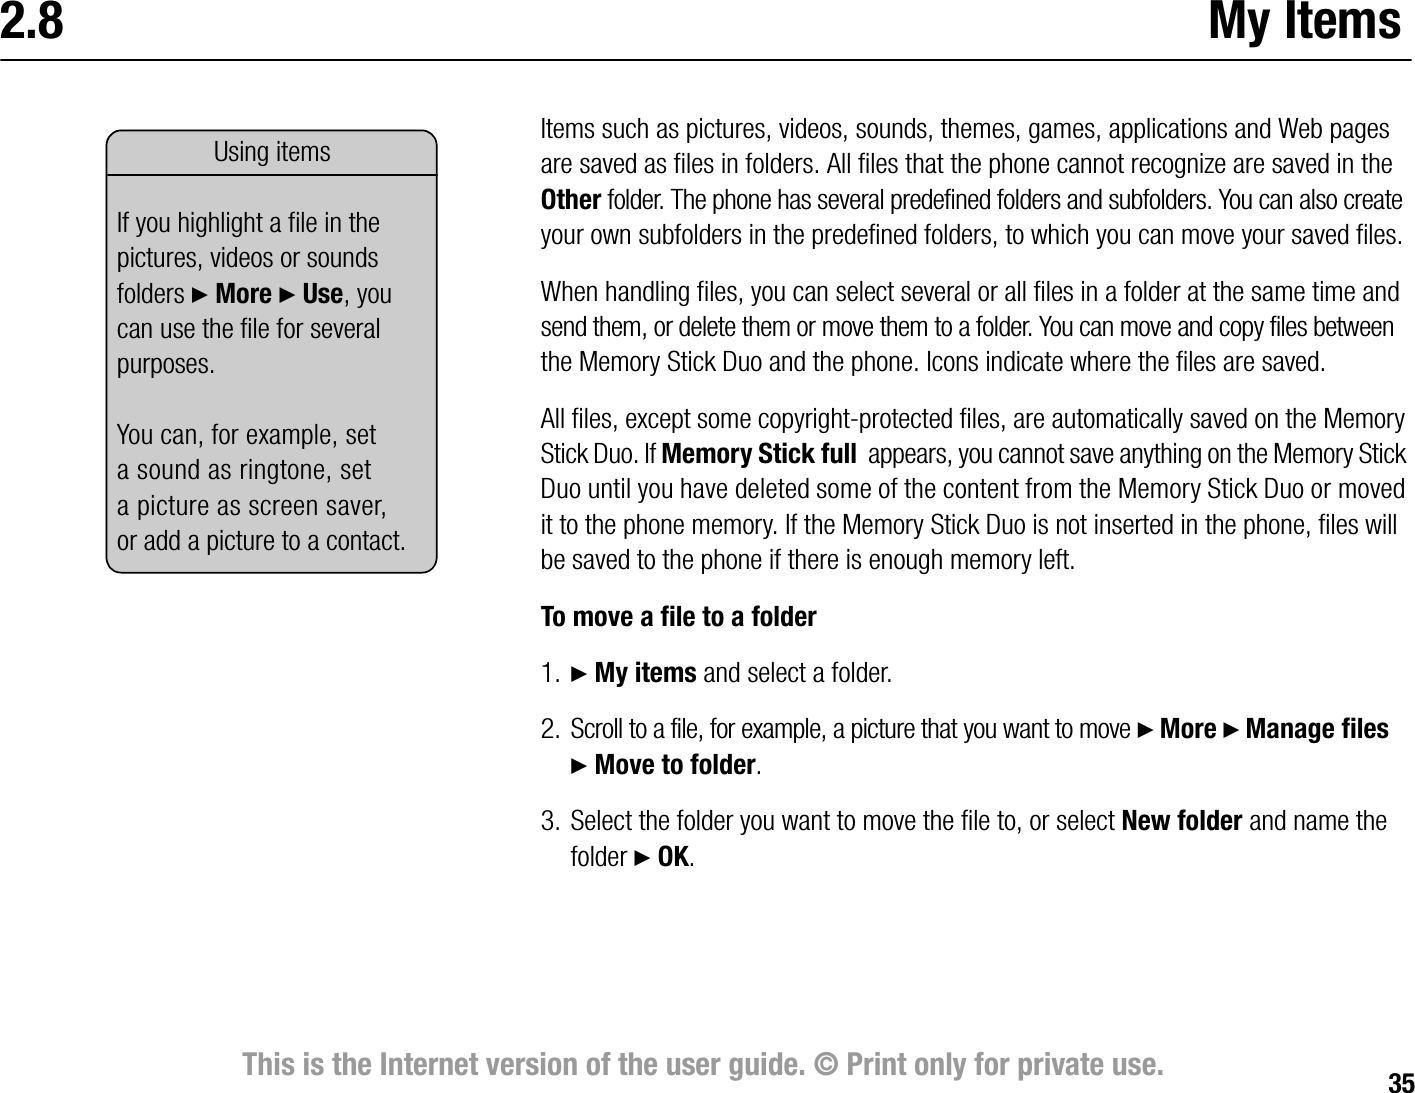 35This is the Internet version of the user guide. © Print only for private use.2.8 My ItemsItems such as pictures, videos, sounds, themes, games, applications and Web pages are saved as files in folders. All files that the phone cannot recognize are saved in the Other folder. The phone has several predefined folders and subfolders. You can also create your own subfolders in the predefined folders, to which you can move your saved files.When handling files, you can select several or all files in a folder at the same time and send them, or delete them or move them to a folder. You can move and copy files between the Memory Stick Duo and the phone. Icons indicate where the files are saved.All files, except some copyrightprotected files, are automatically saved on the Memory Stick Duo. If Memory Stick full  appears, you cannot save anything on the Memory Stick Duo until you have deleted some of the content from the Memory Stick Duo or moved it to the phone memory. If the Memory Stick Duo is not inserted in the phone, files will be saved to the phone if there is enough memory left.To move a file to a folder1. } My items and select a folder.2. Scroll to a file, for example, a picture that you want to move } More } Manage files }Move to folder.3. Select the folder you want to move the file to, or select New folder and name the folder } OK.Using items If you highlight a file in the pictures, videos or sounds folders } More } Use, you can use the file for several purposes.You can, for example, set a sound as ringtone, set a picture as screen saver, or add a picture to a contact.